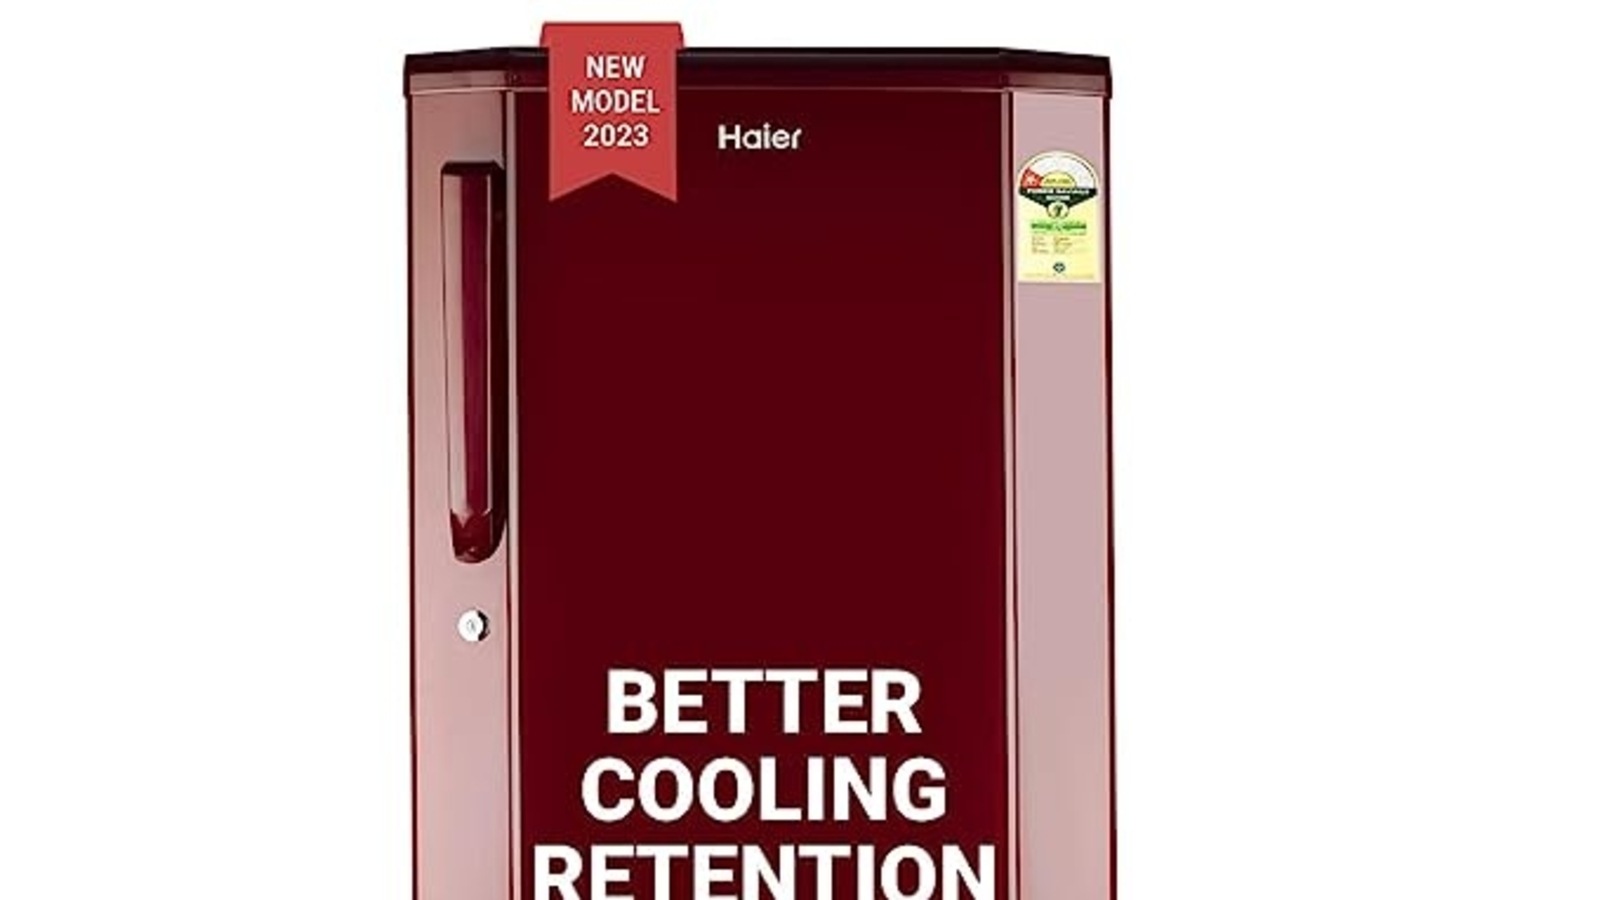 haier-to-whirlpool-here-are-top-5-refrigerators-with-huge-discounts-on